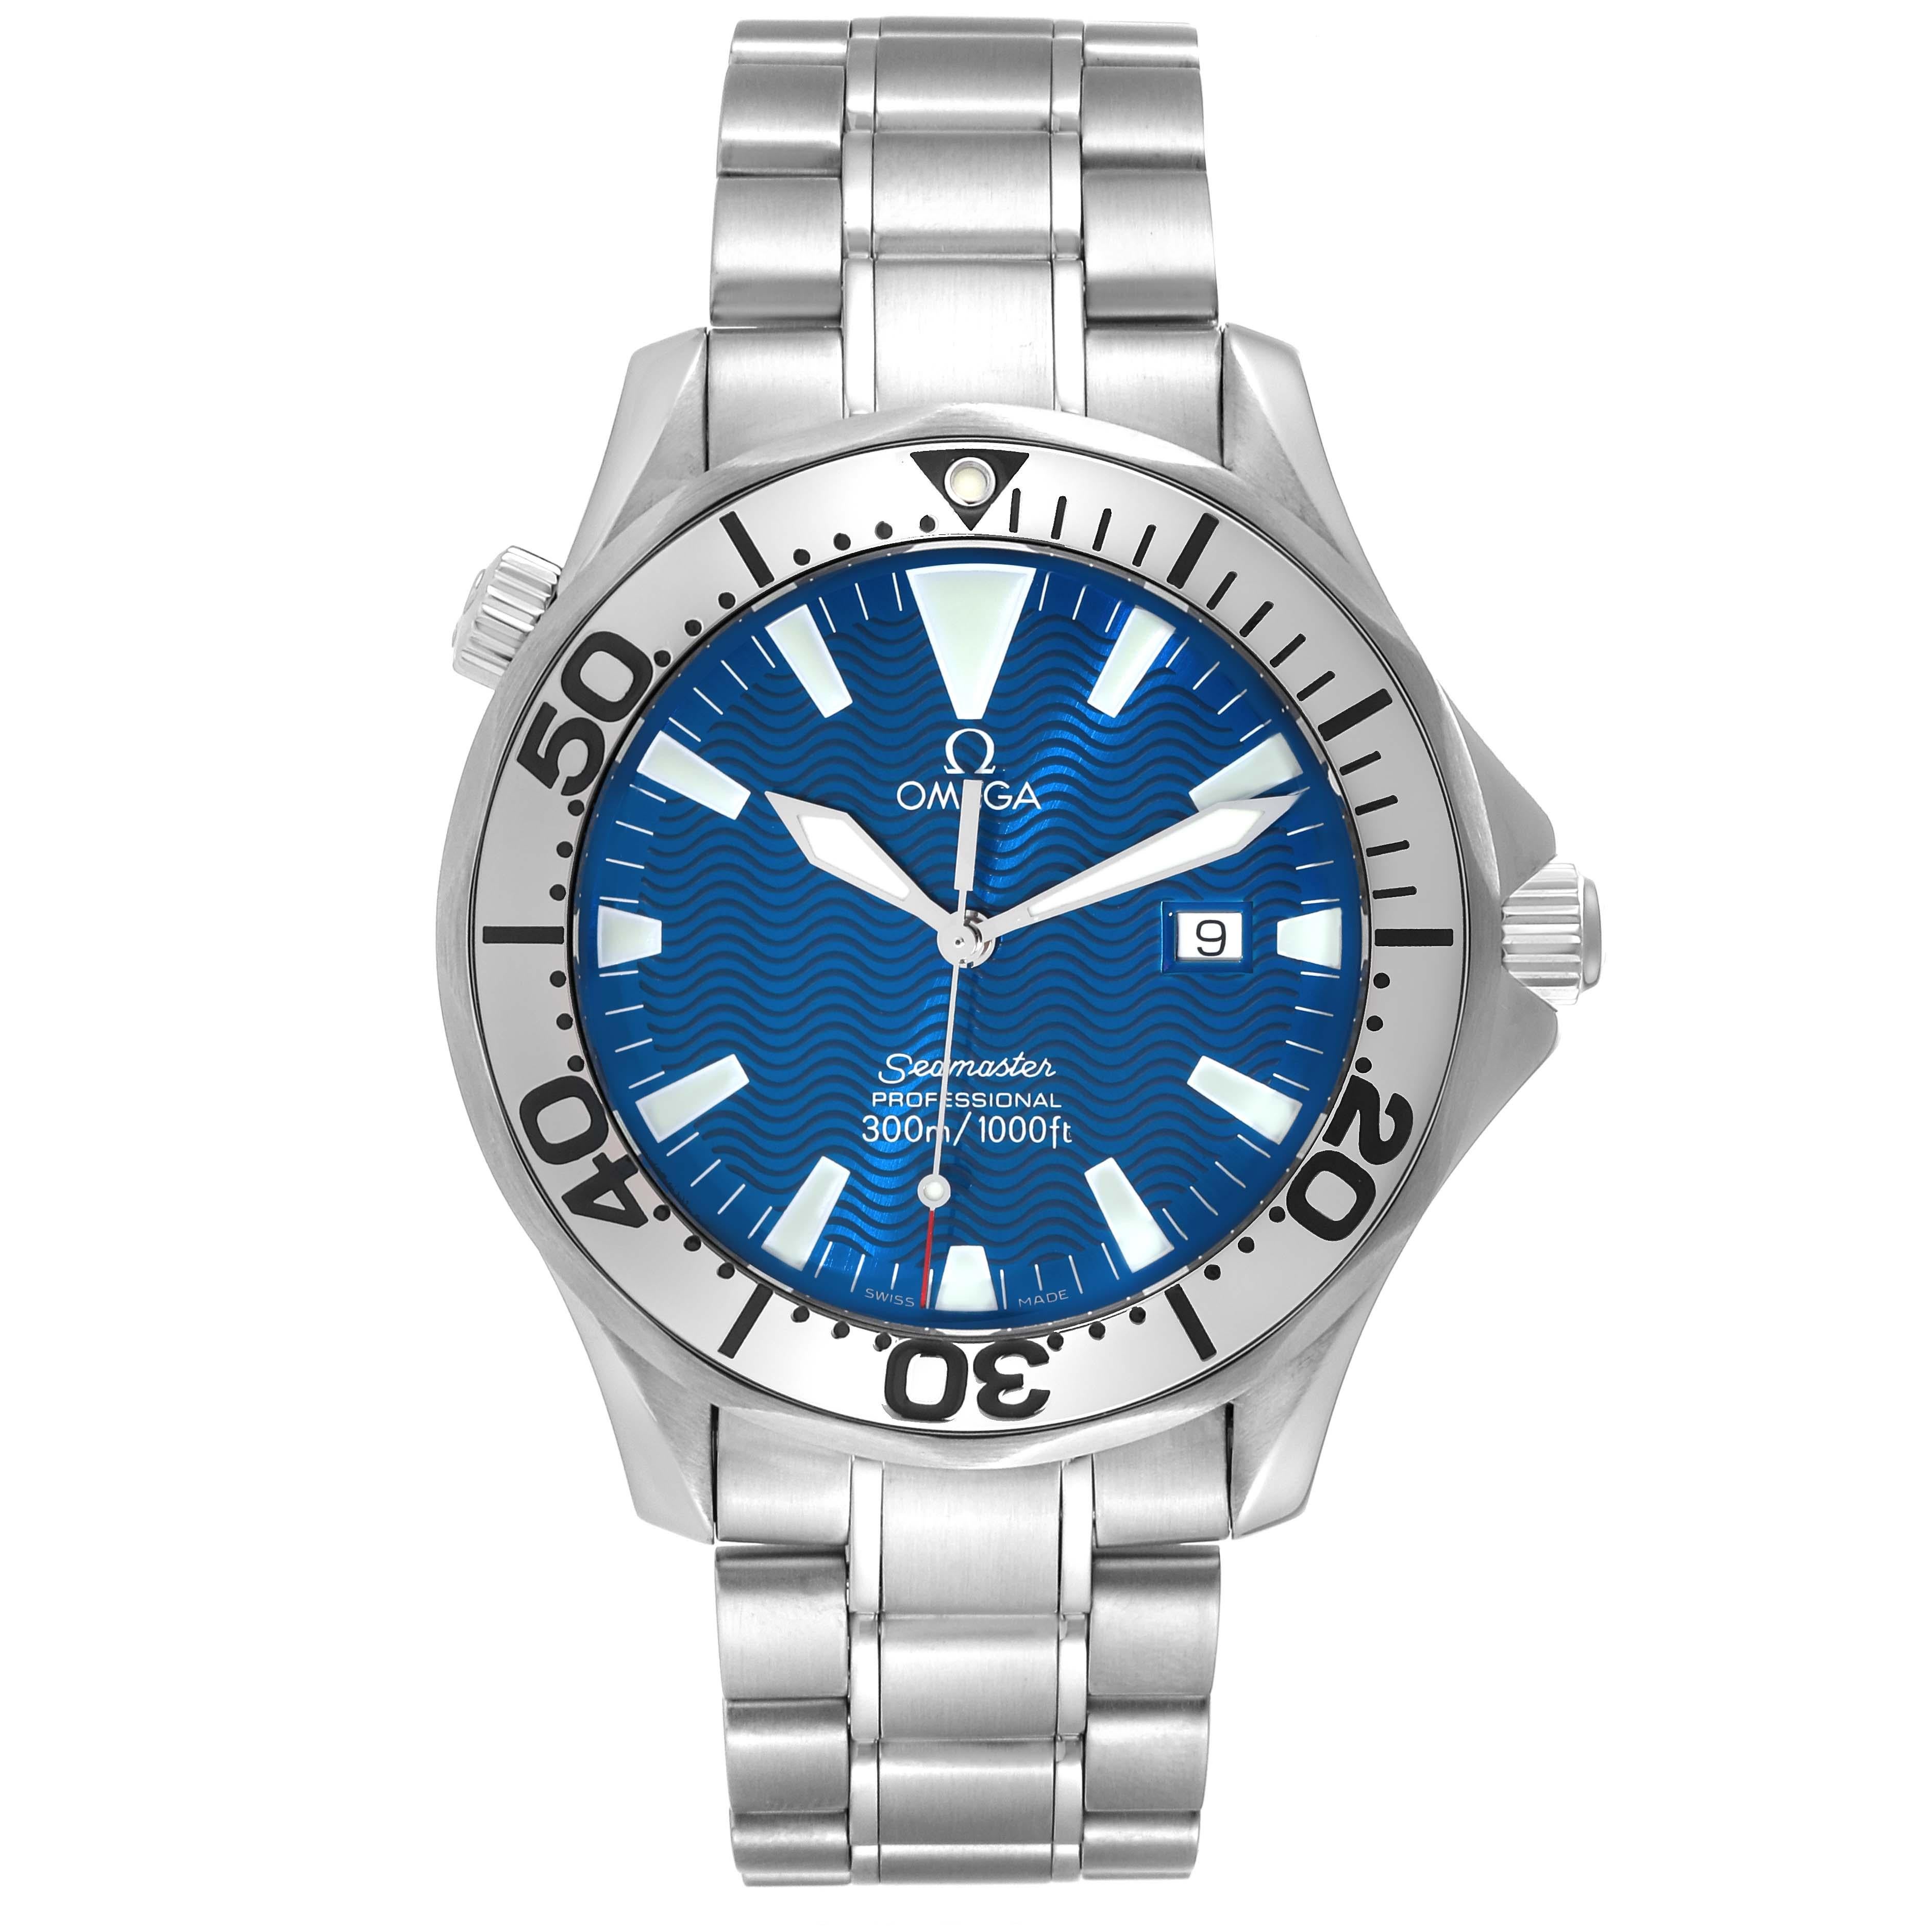 Omega Seamaster Electric Blue Wave Dial Steel Mens Watch 2265.80.00. Quartz precision movement with rhodium-plated finish. Caliber 1538. Stainless steel case 41.0 mm in diameter.  Omega logo on the crown. Polished stainless steel unidirectional